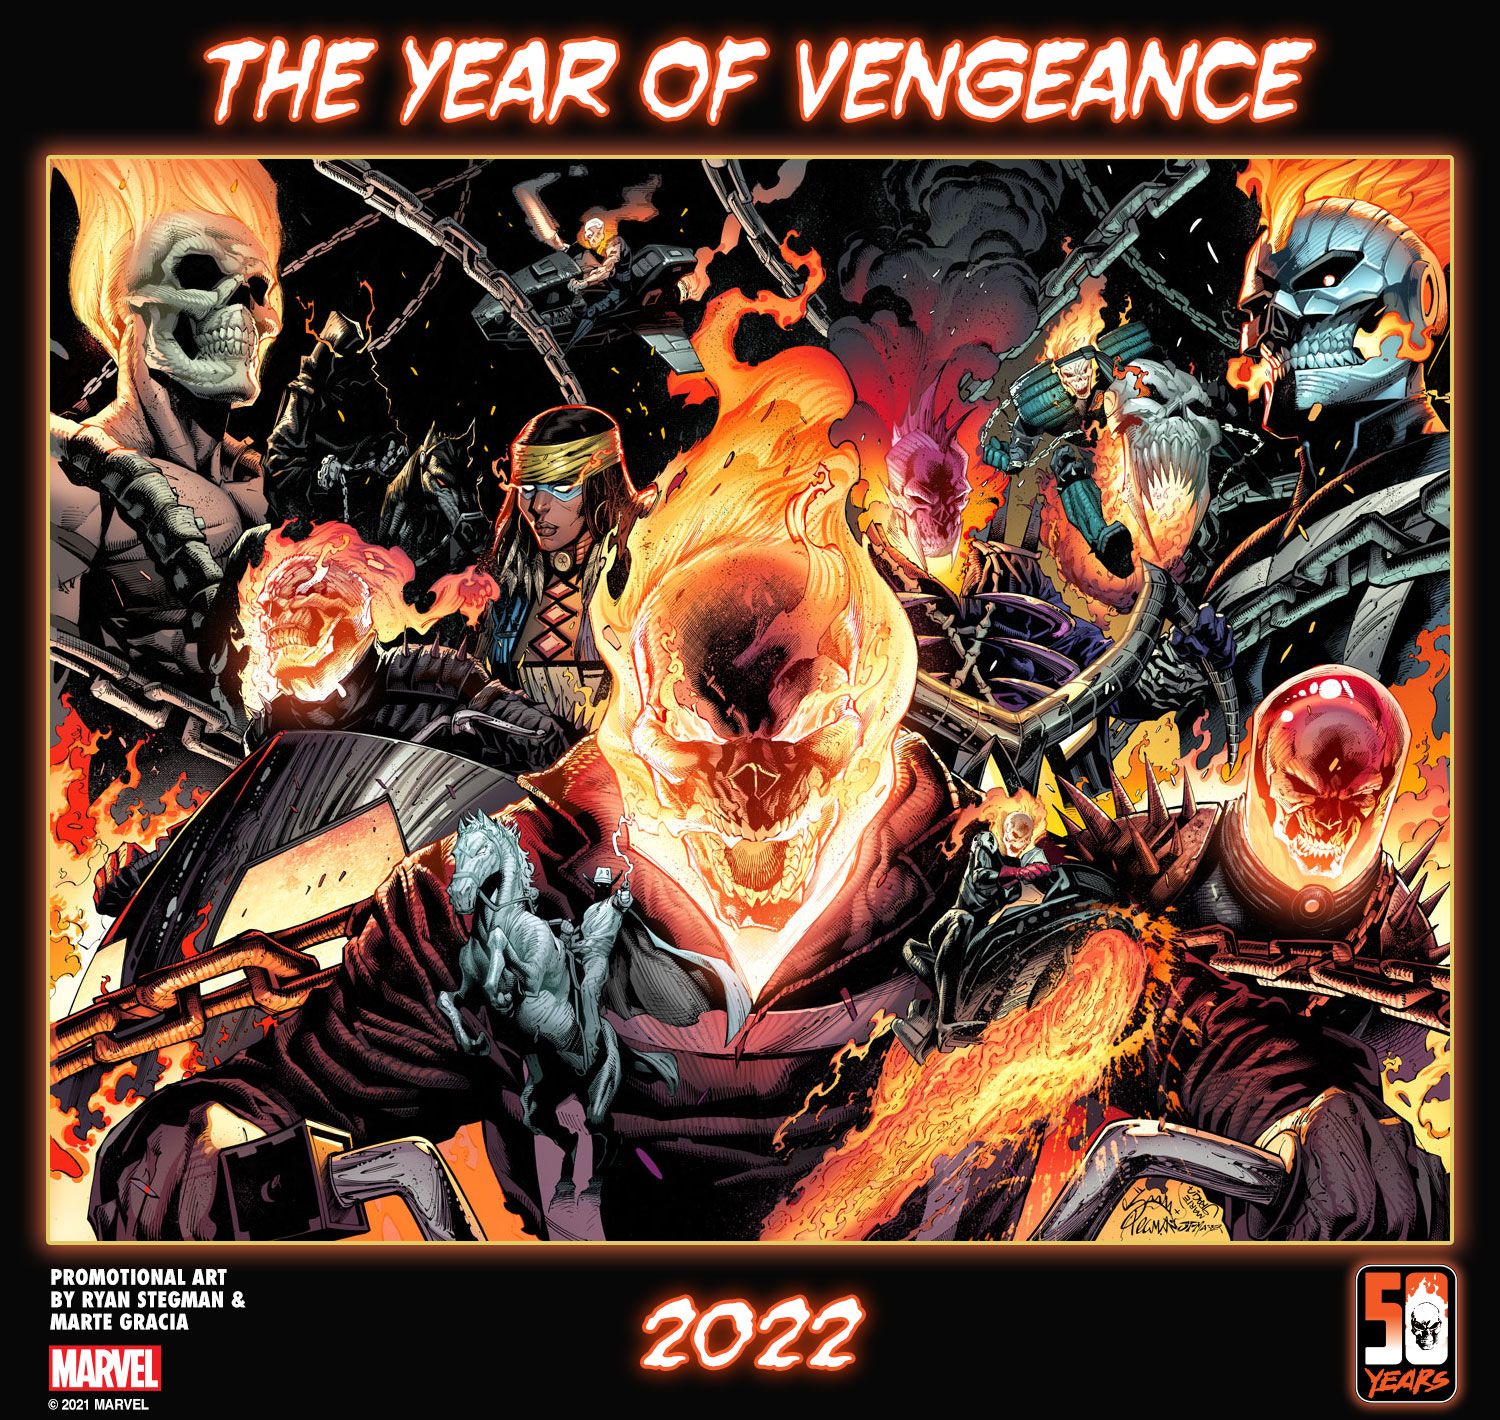 Johnny Blaze leads the charge for Ghost Rider 50 Years of Vengeance in 2022 in art by Ryan Stegman